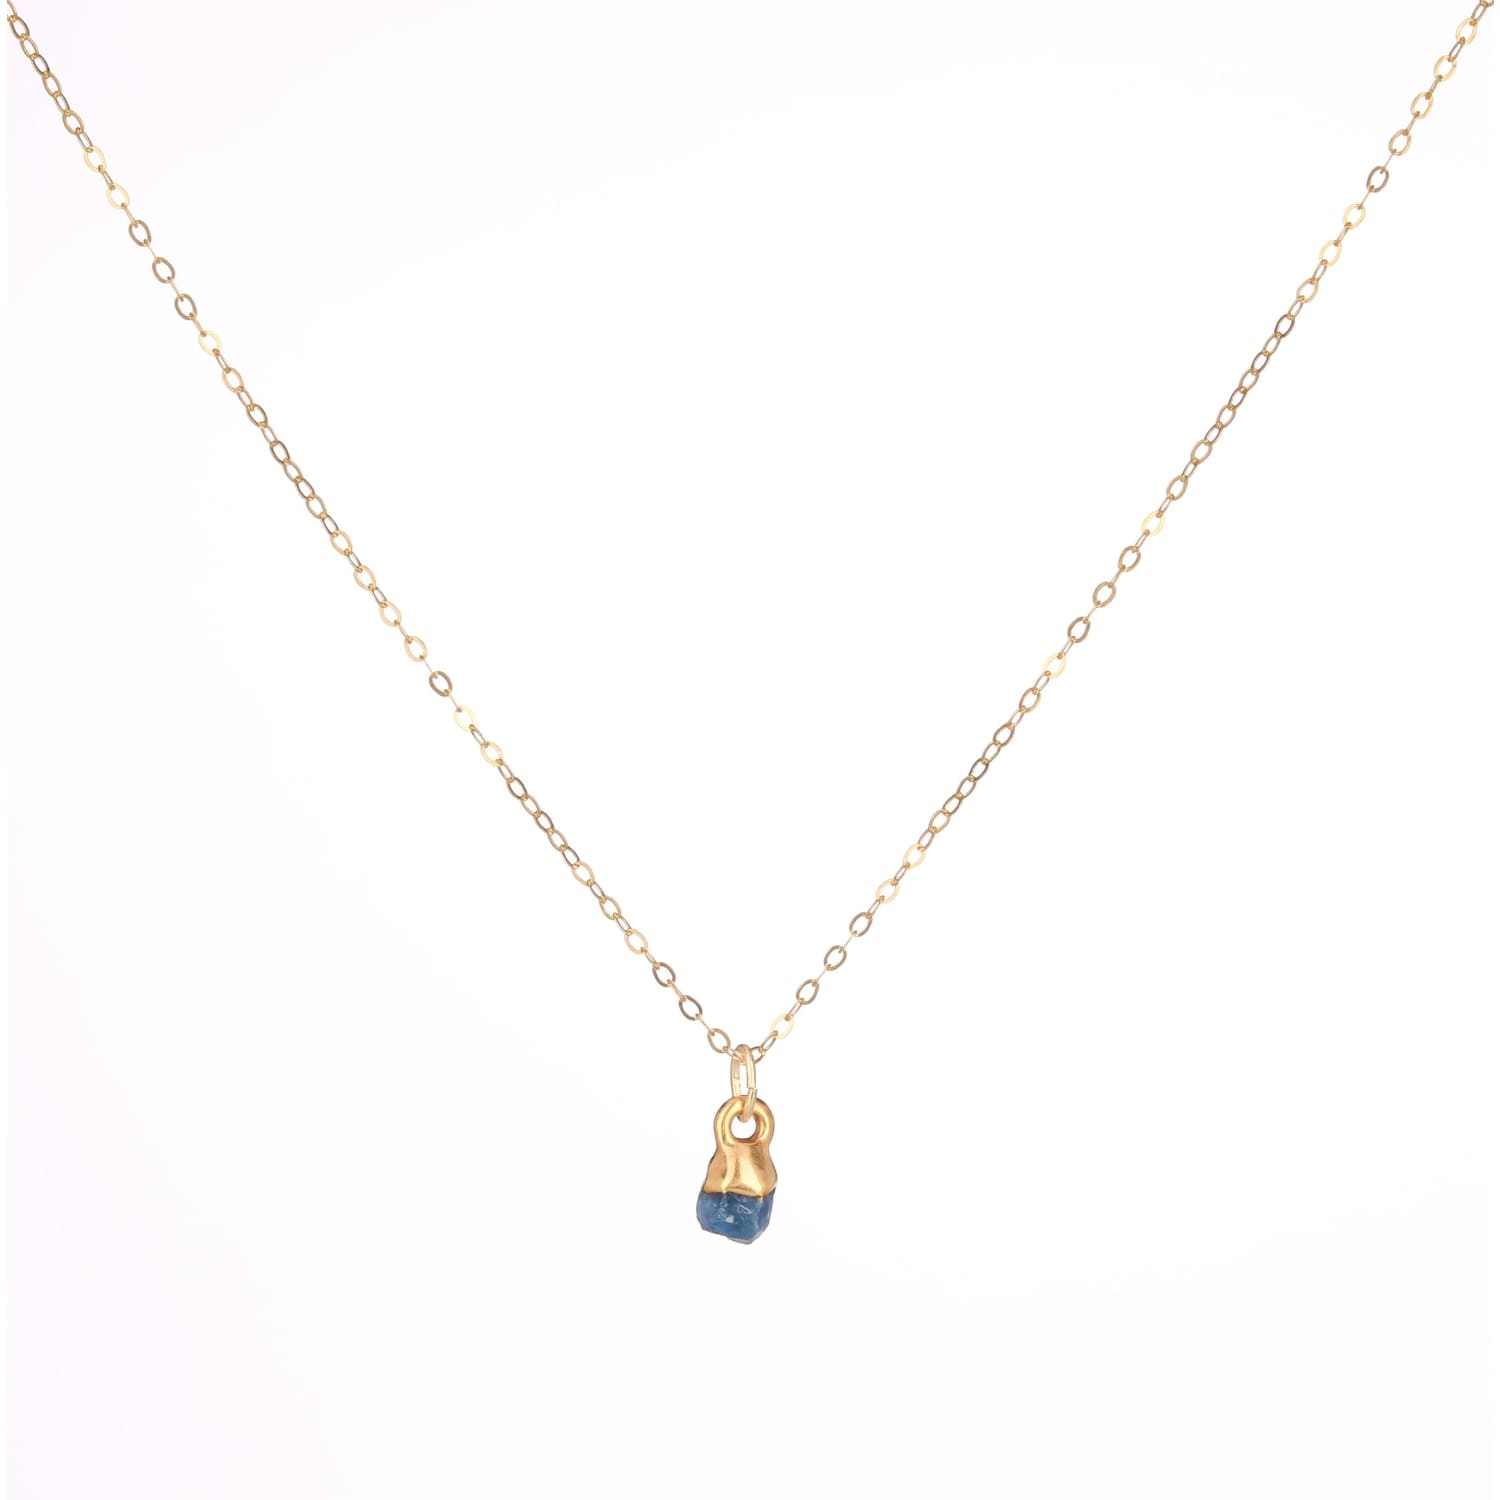 Dainty Sapphire and Diamonds Necklace